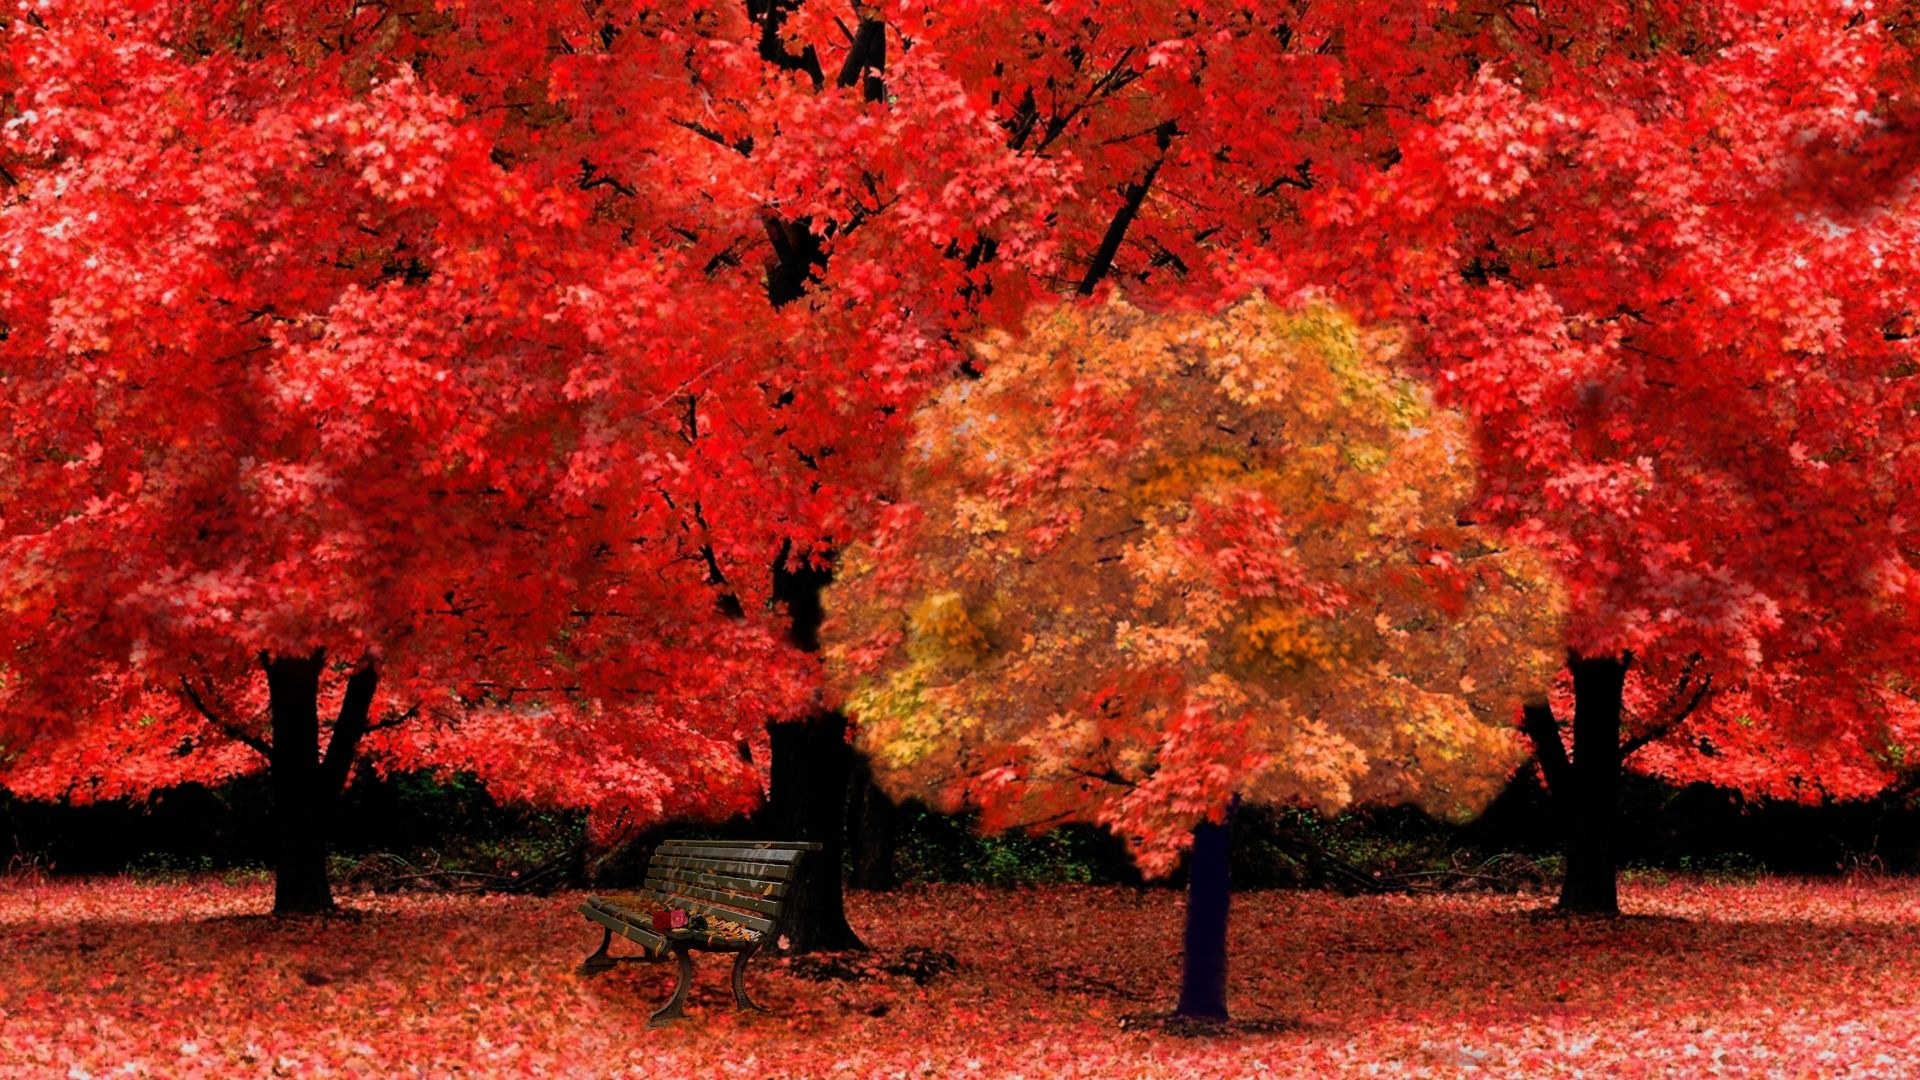 Red Autumn Leaves, High Definition, High Quality, Widescreen